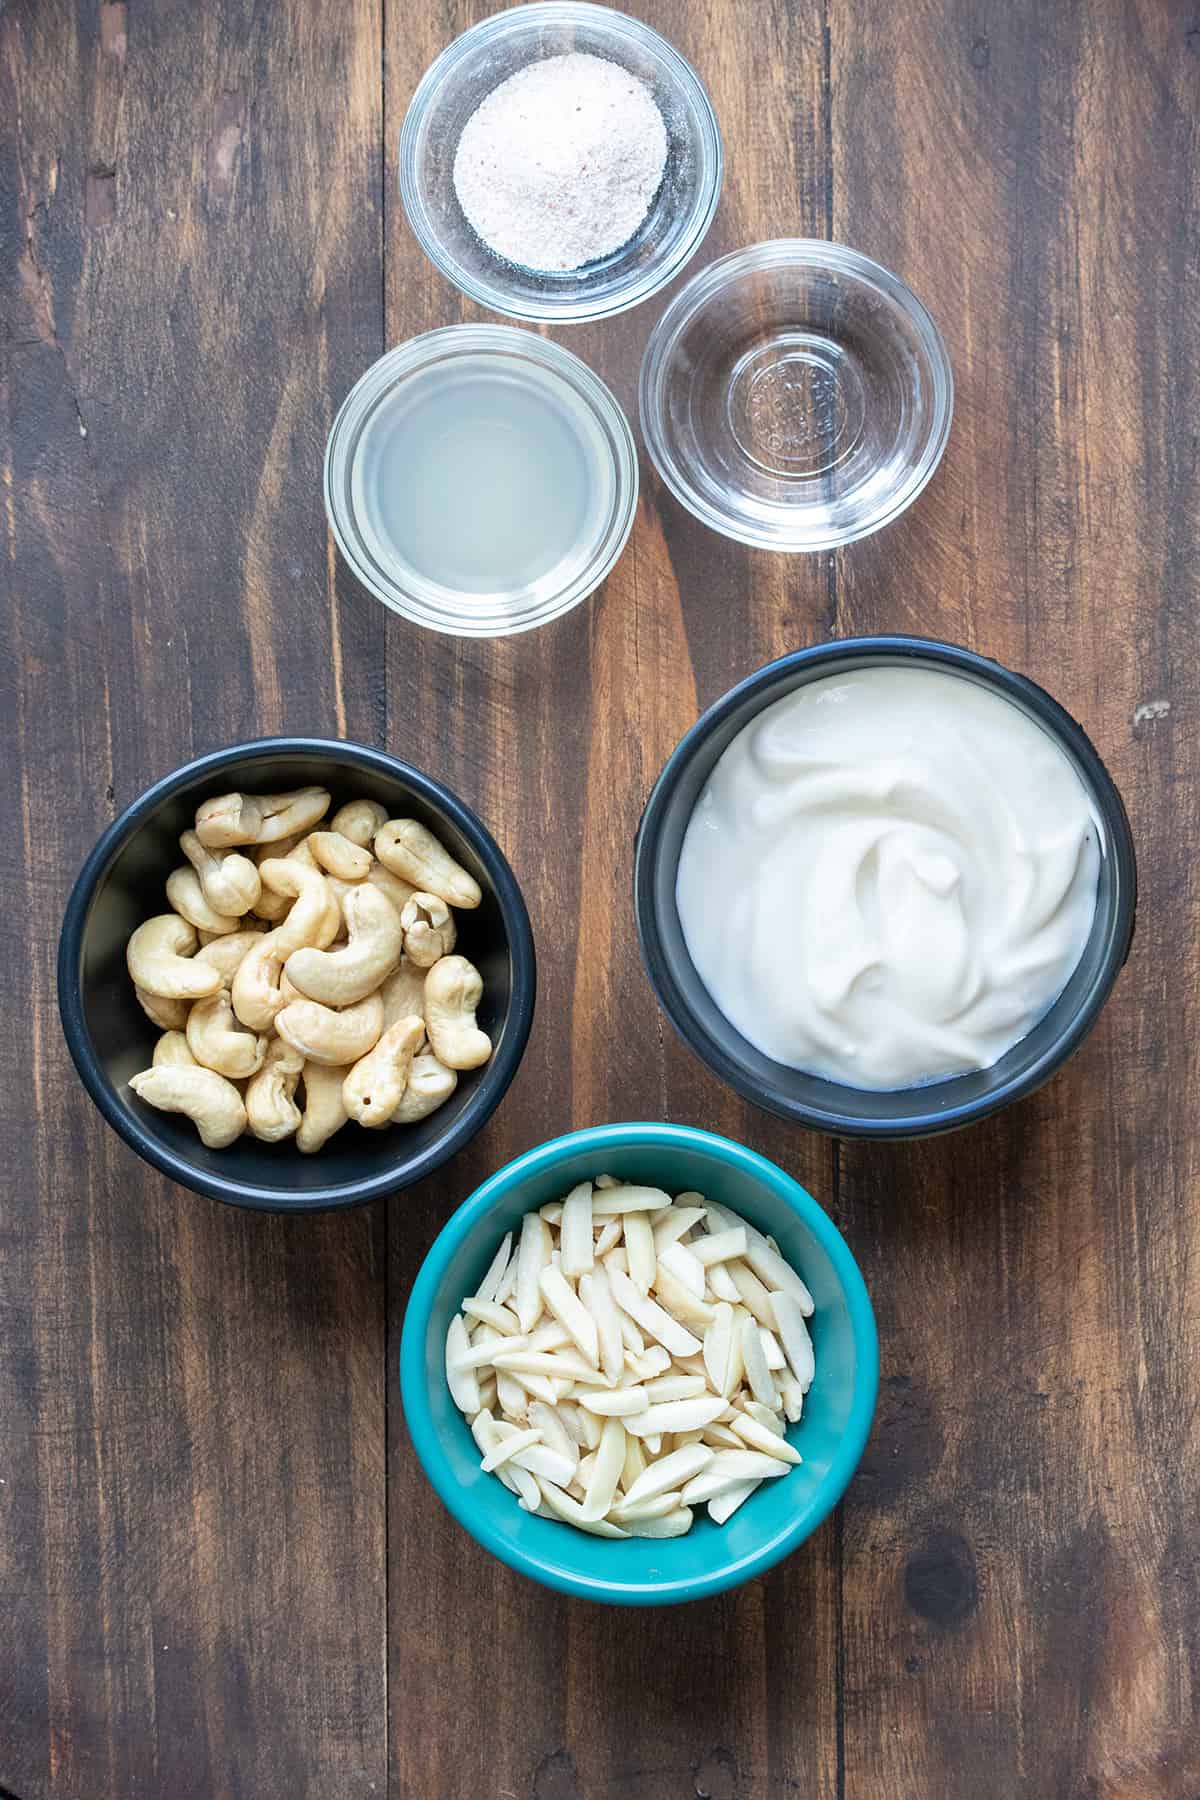 Different colored and sized bowls filled with nuts, yogurt, lemon juice, vinegar and salt.